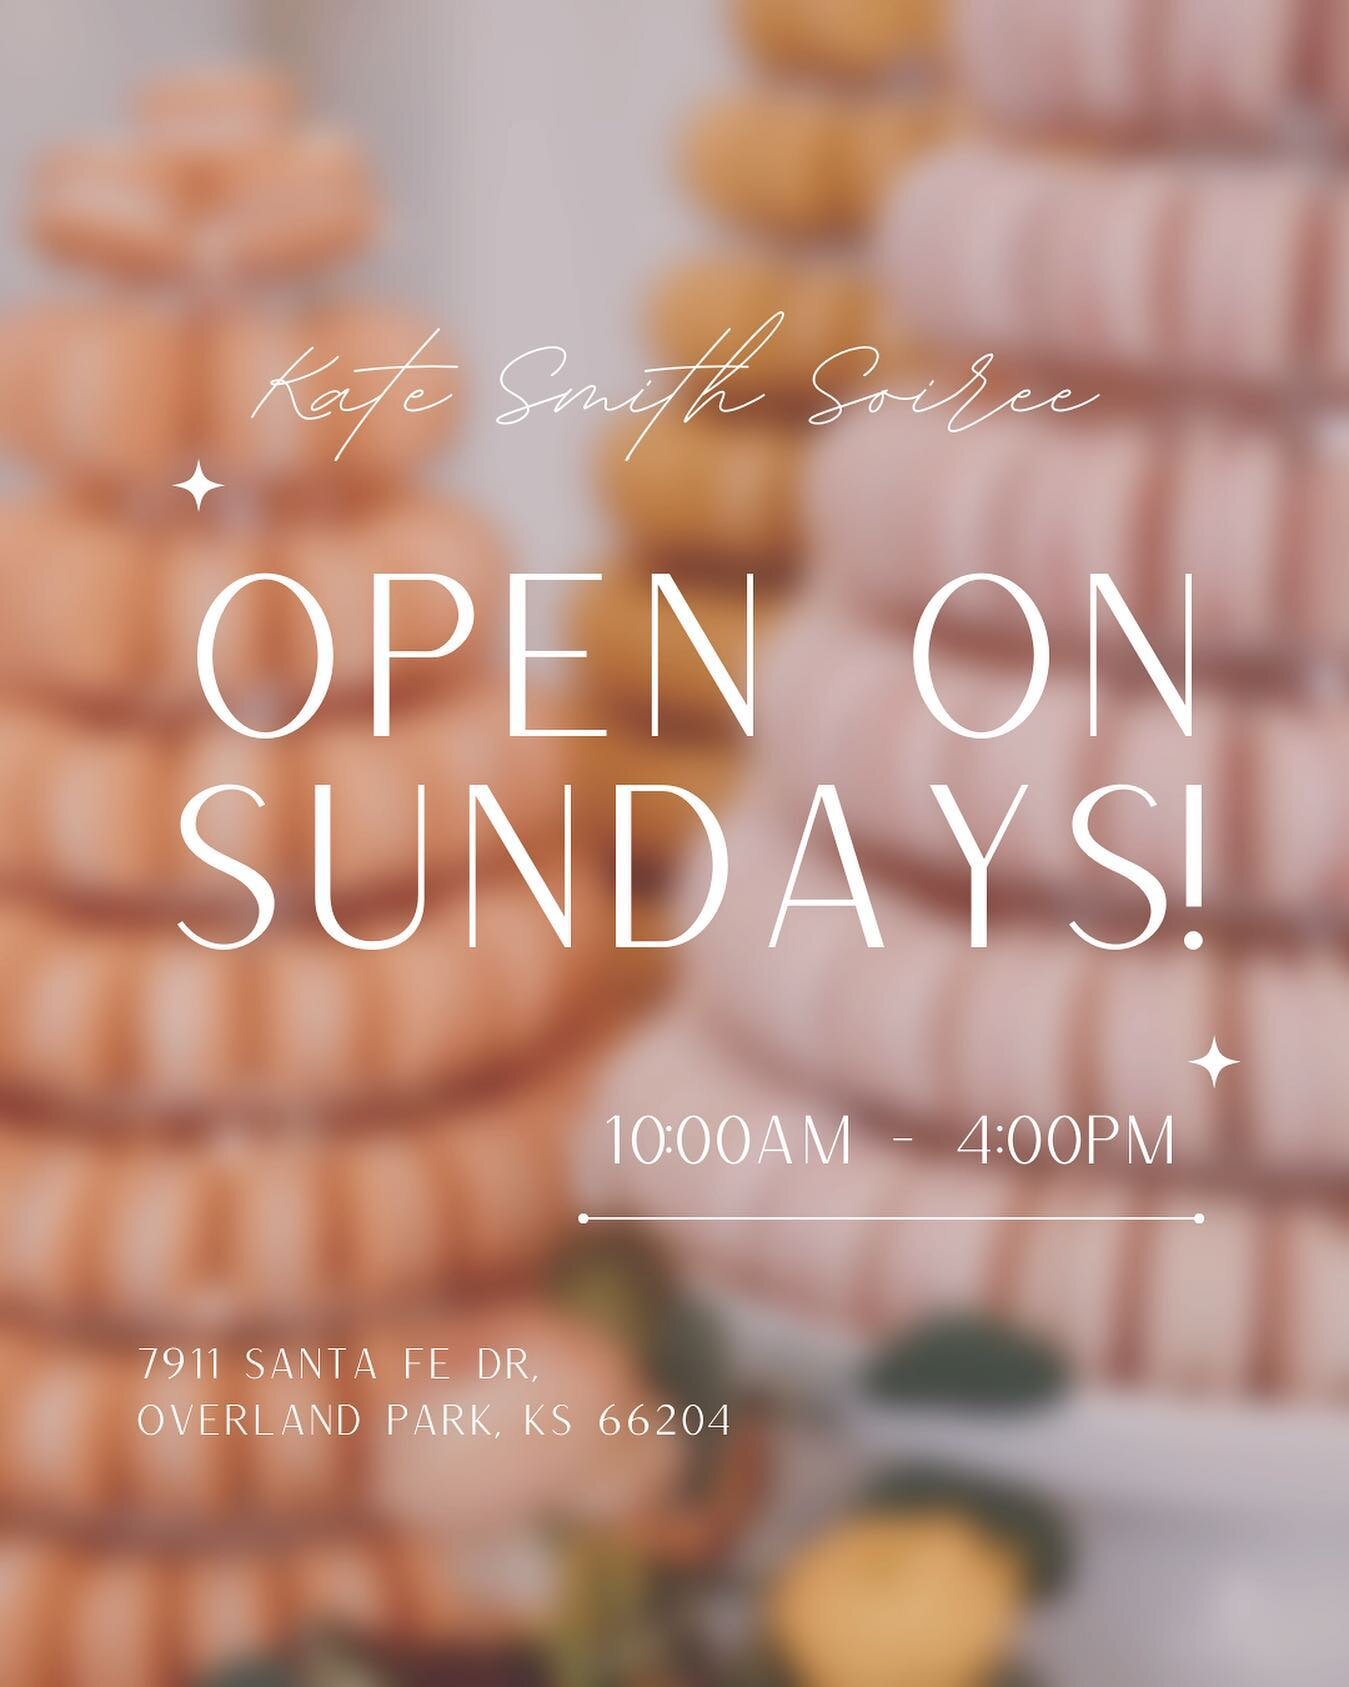 Happy Sunday! As promised, we are now open on Sundays from 10am-4pm! Come grab a pot of tea and a treat and make this your Sunday tradition 💖

We will not be open next Sunday for Mother&rsquo;s Day, but will resume hours the following week!